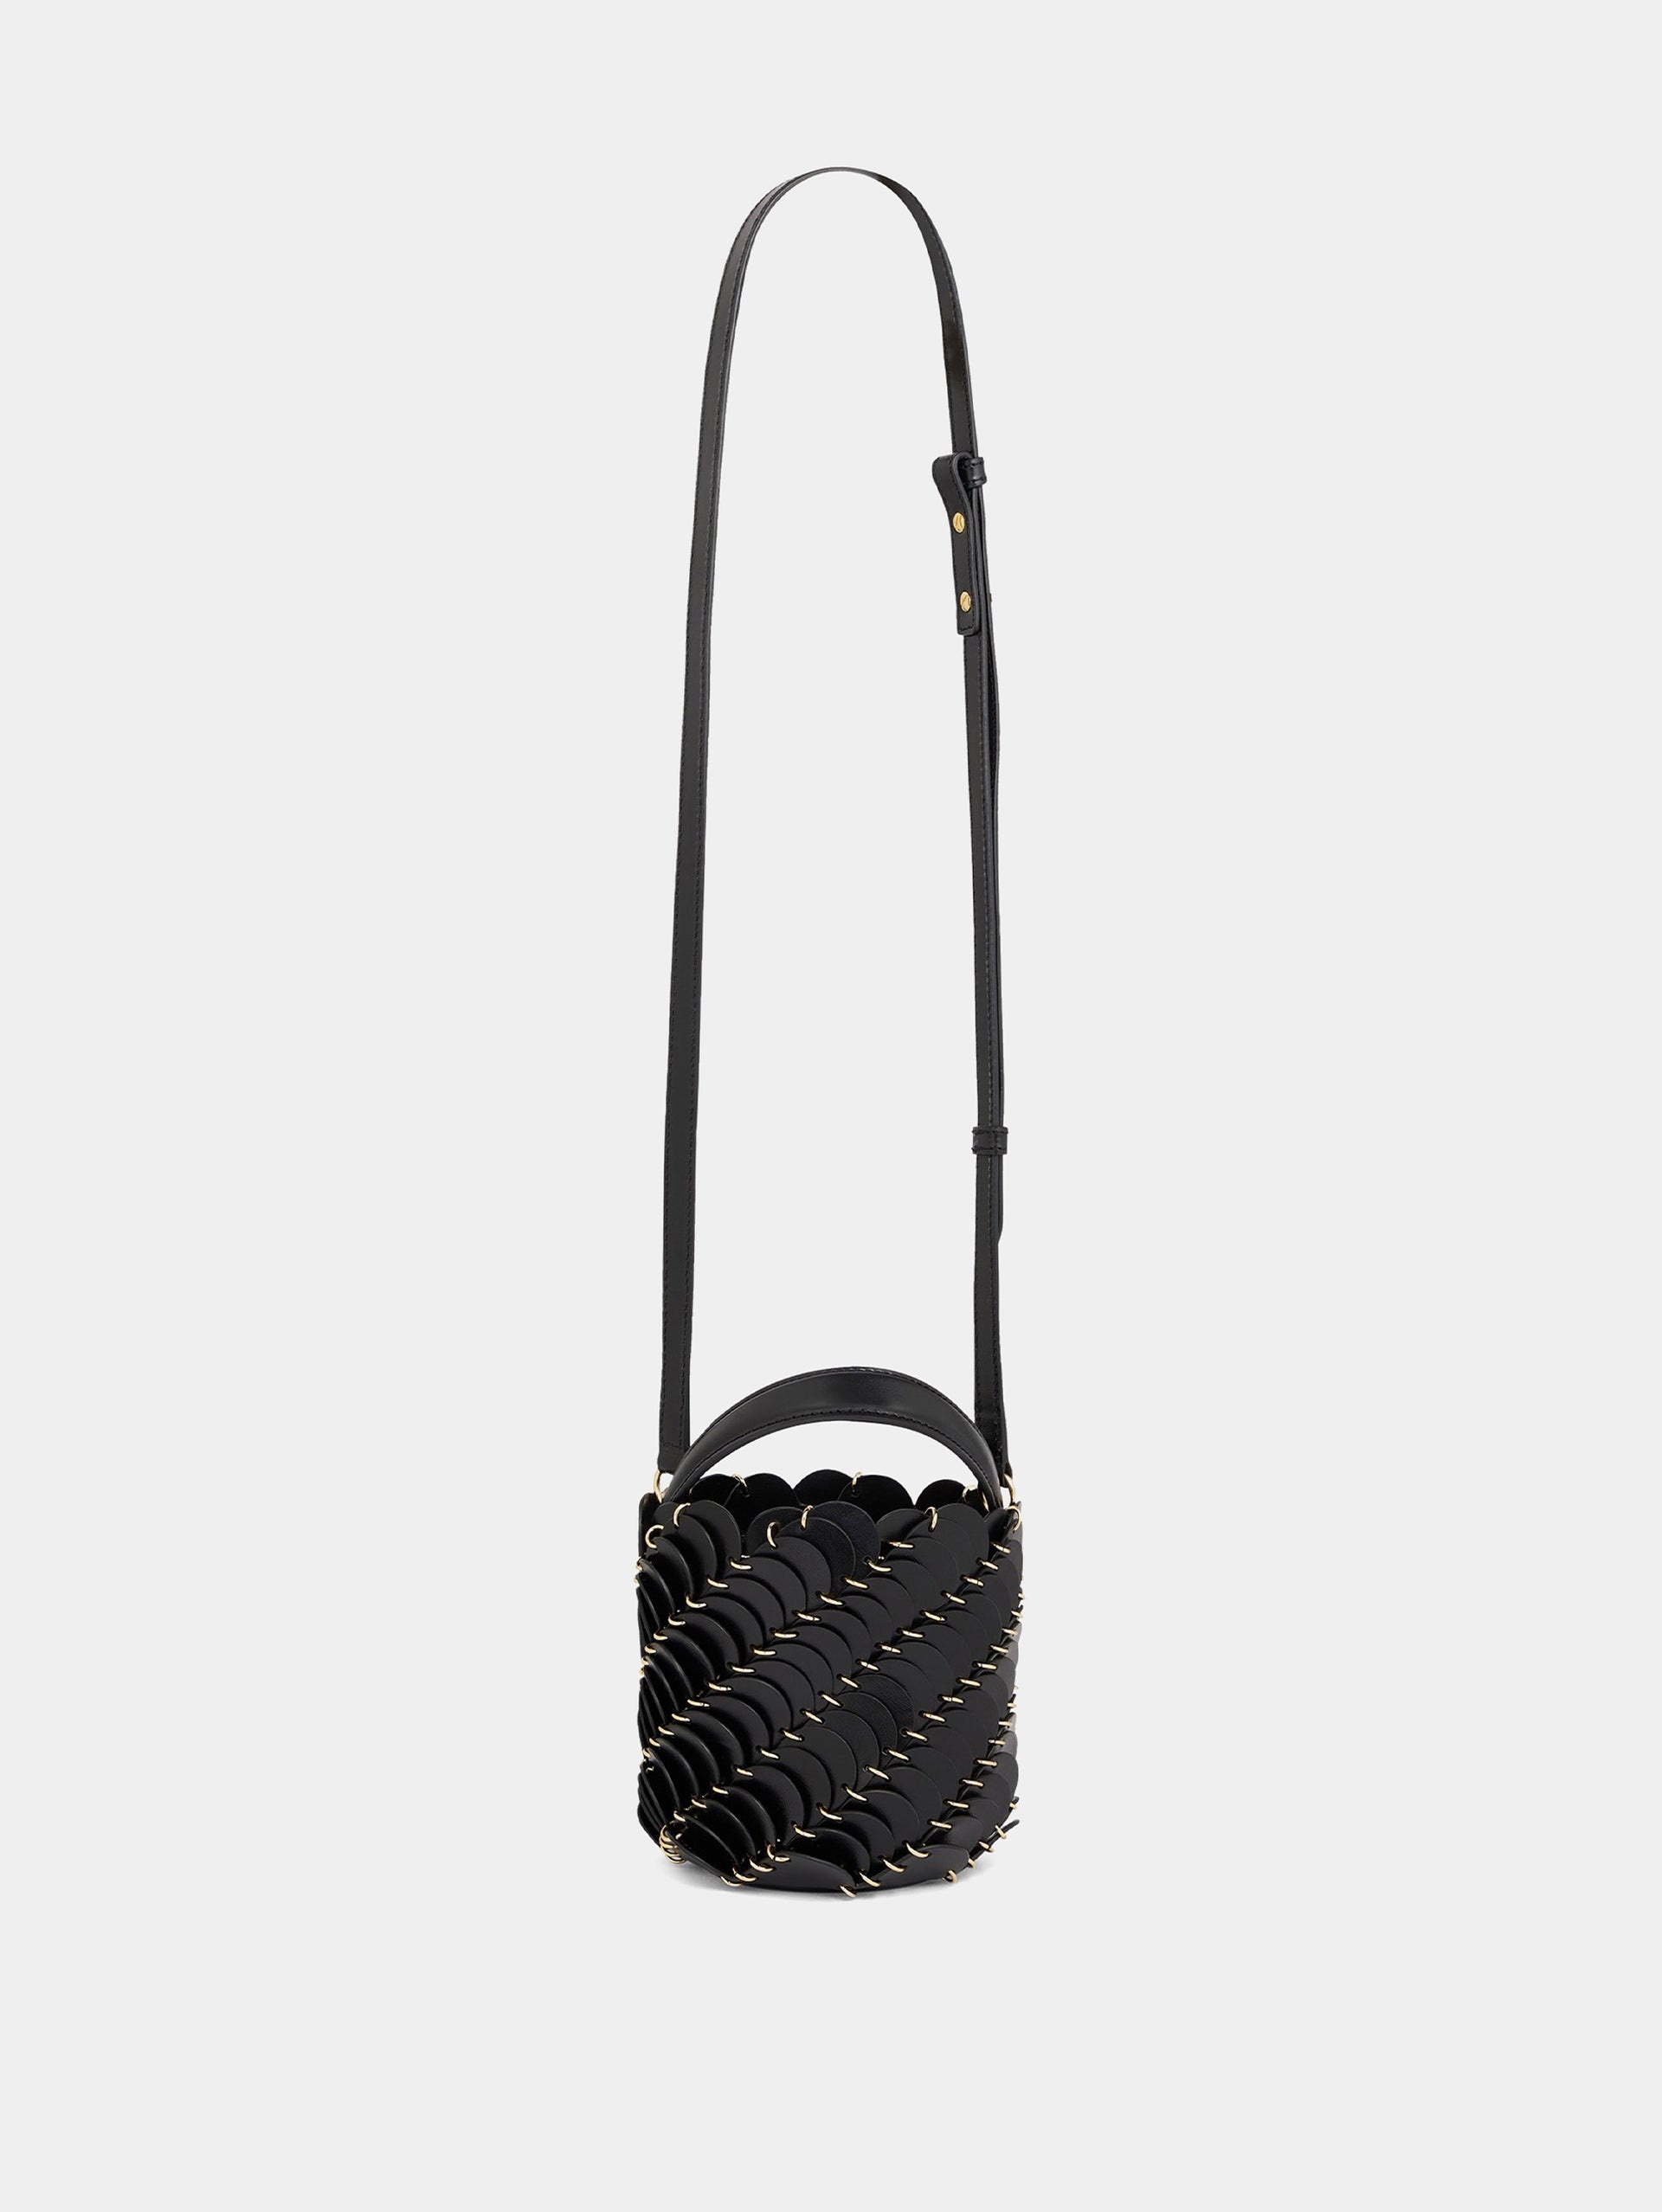 SMALL BLACK BUCKET PACO BAG IN LEATHER - 1